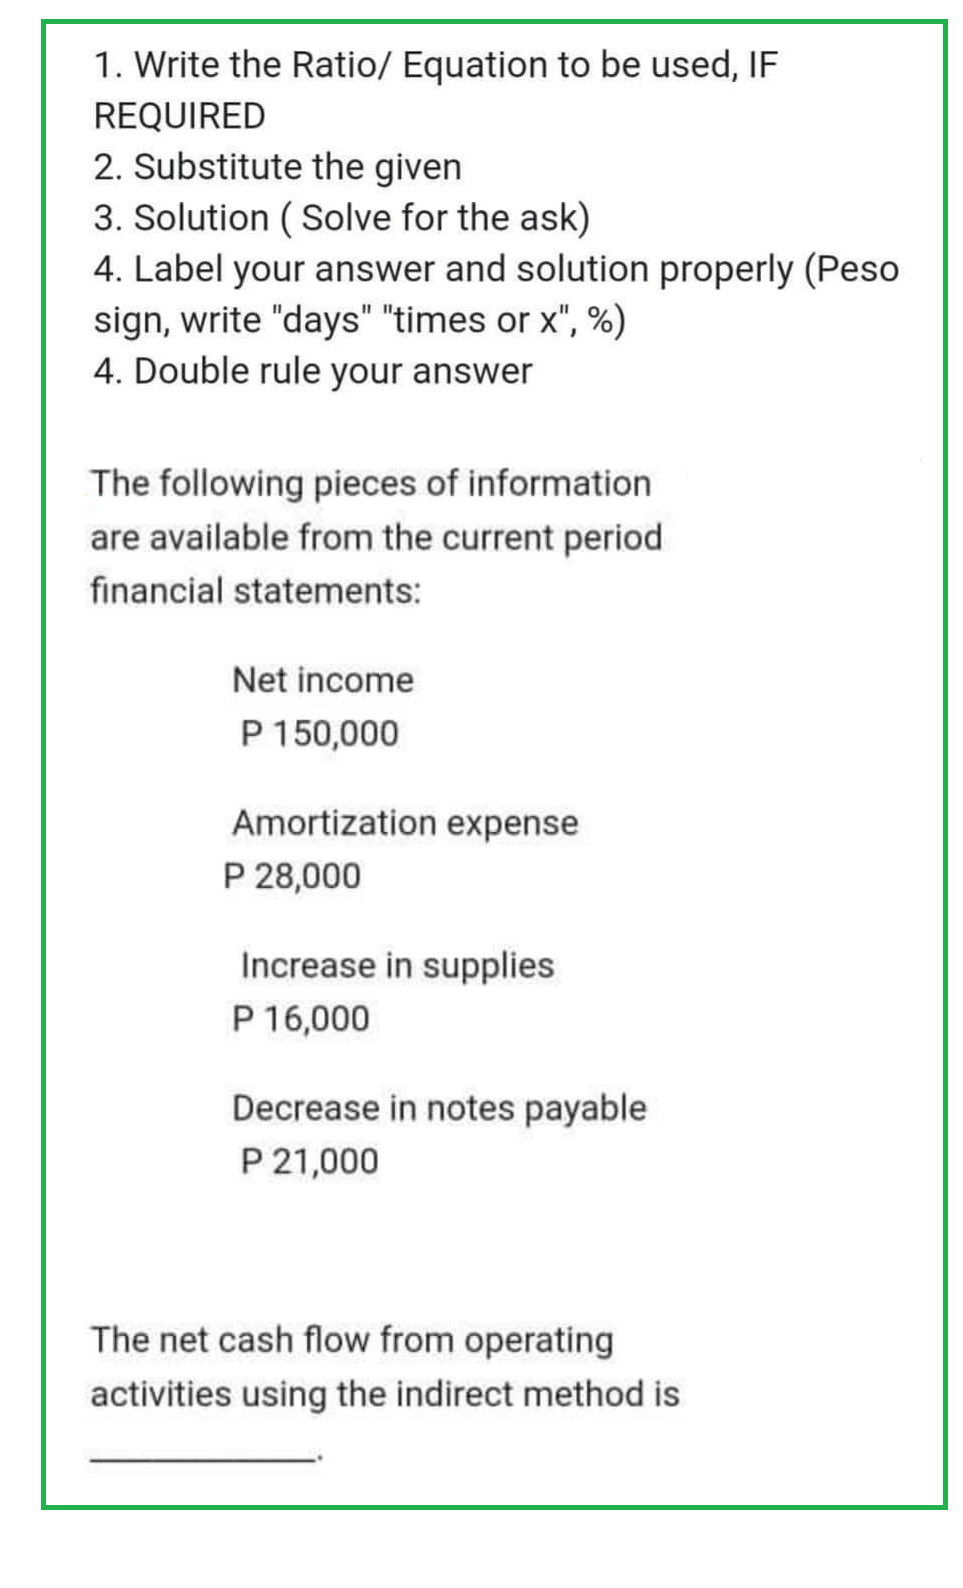 1. Write the Ratio/ Equation to be used, IF
REQUIRED
2. Substitute the given
3. Solution (Solve for the ask)
4. Label your answer and solution properly (Peso
sign, write "days" "times or x", %)
4. Double rule your answer
The following pieces of information
are available from the current period
financial statements:
Net income
P 150,000
Amortization expense
P 28,000
Increase in supplies
P 16,000
Decrease in notes payable
P 21,000
The net cash flow from operating
activities using the indirect method is